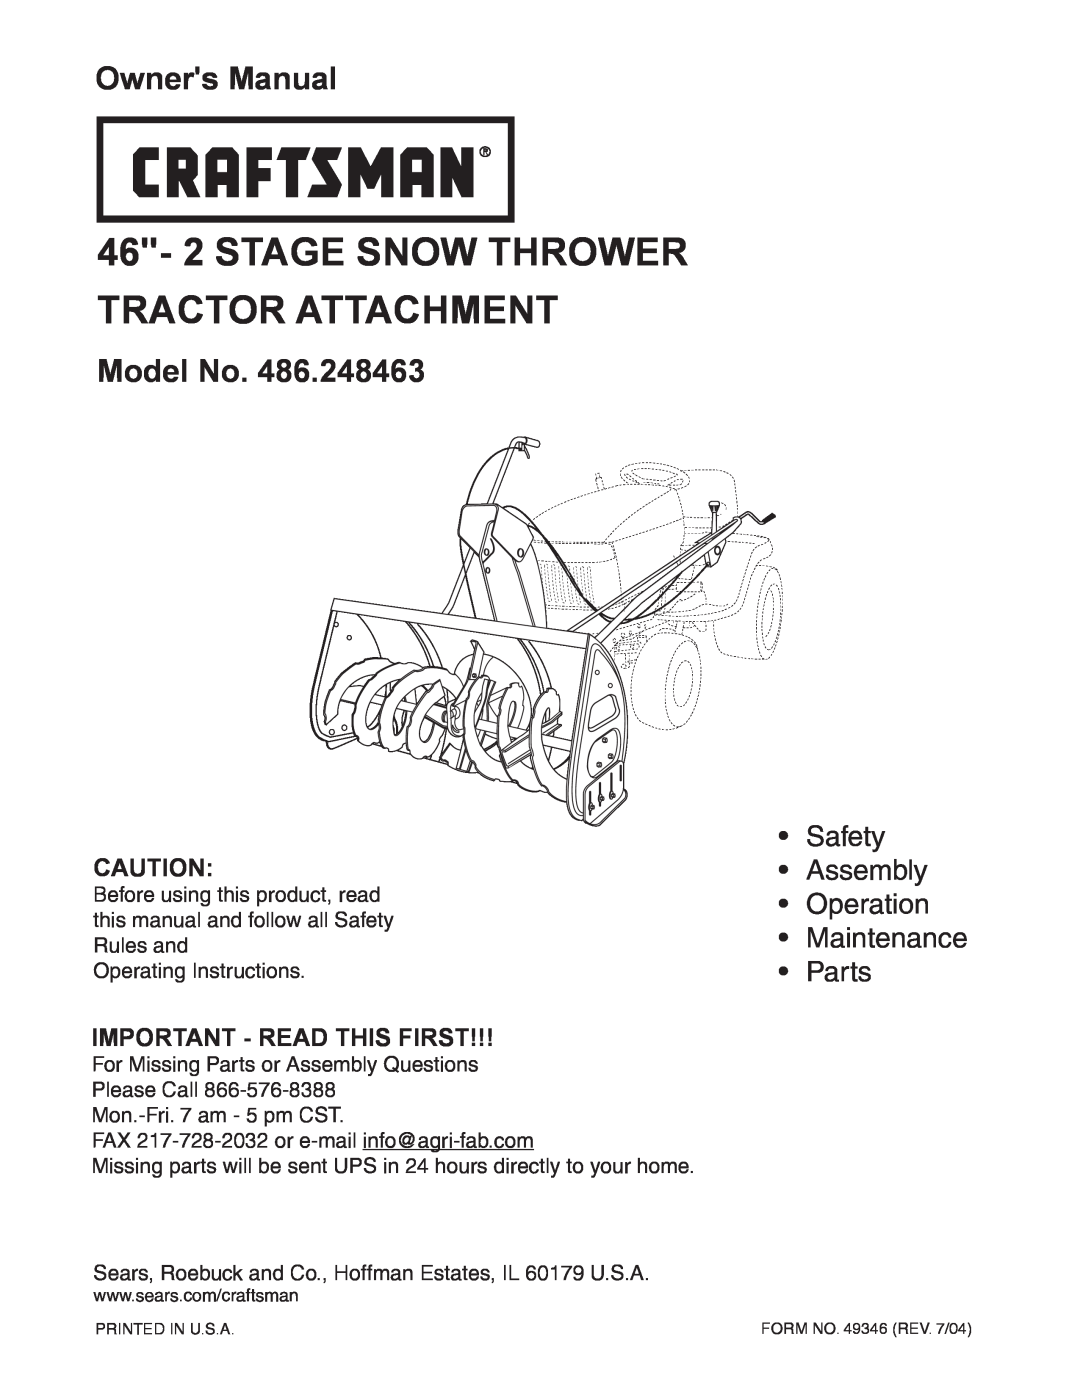 Sears 486.248463 owner manual Important - Read This First, 46- 2 STAGE SNOW THROWER TRACTOR ATTACHMENT, Model No 